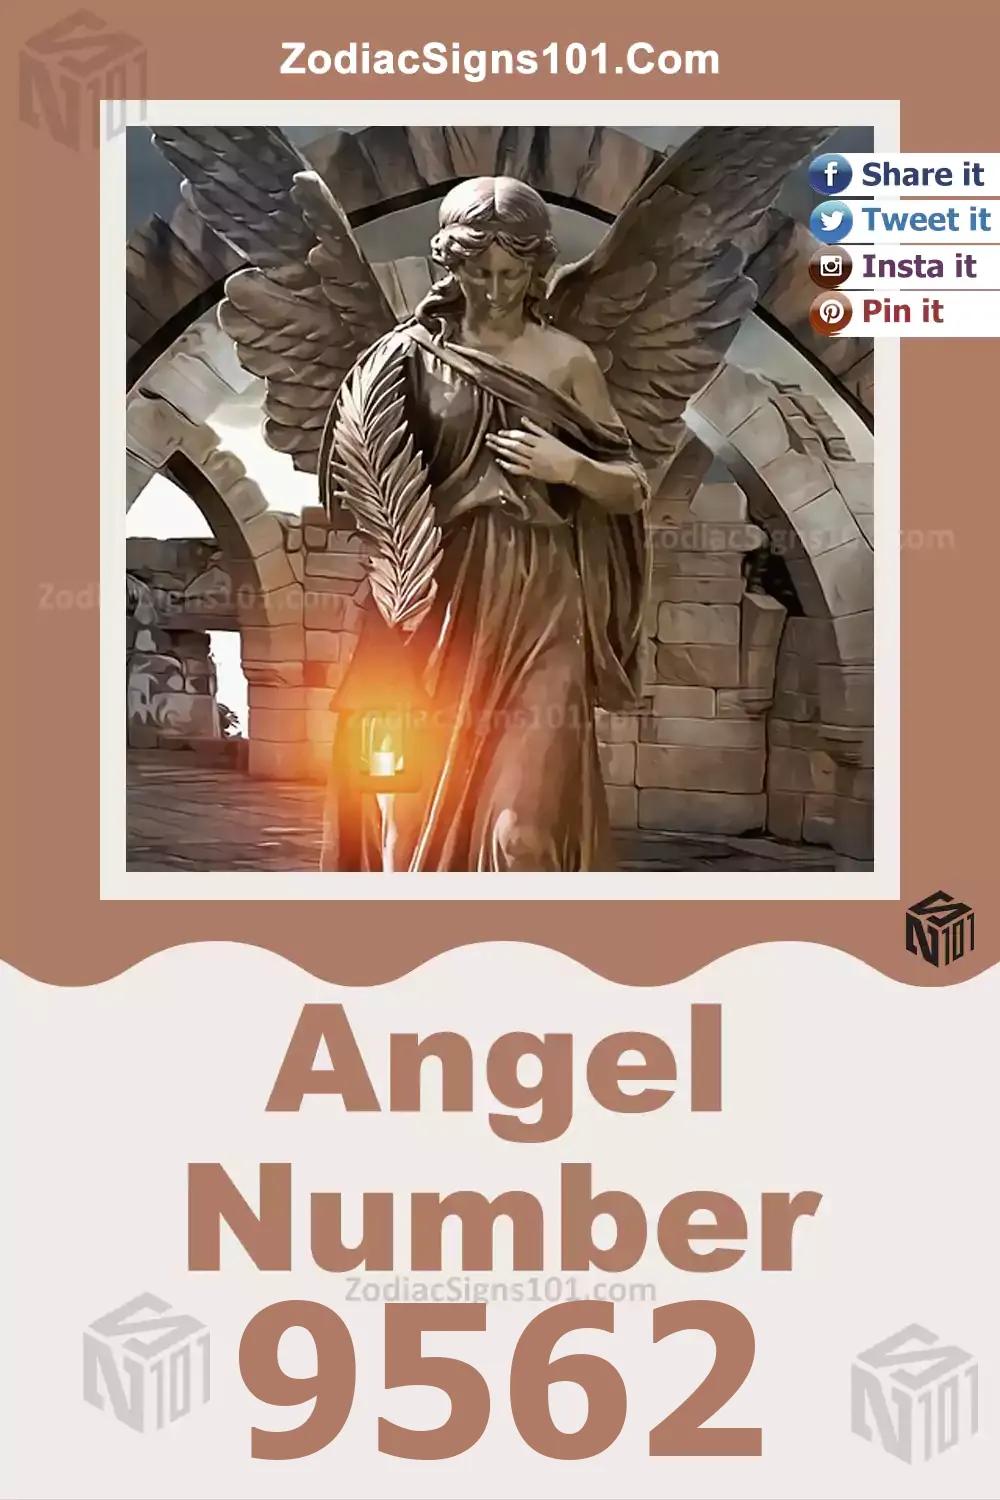 9562 Angel Number Meaning